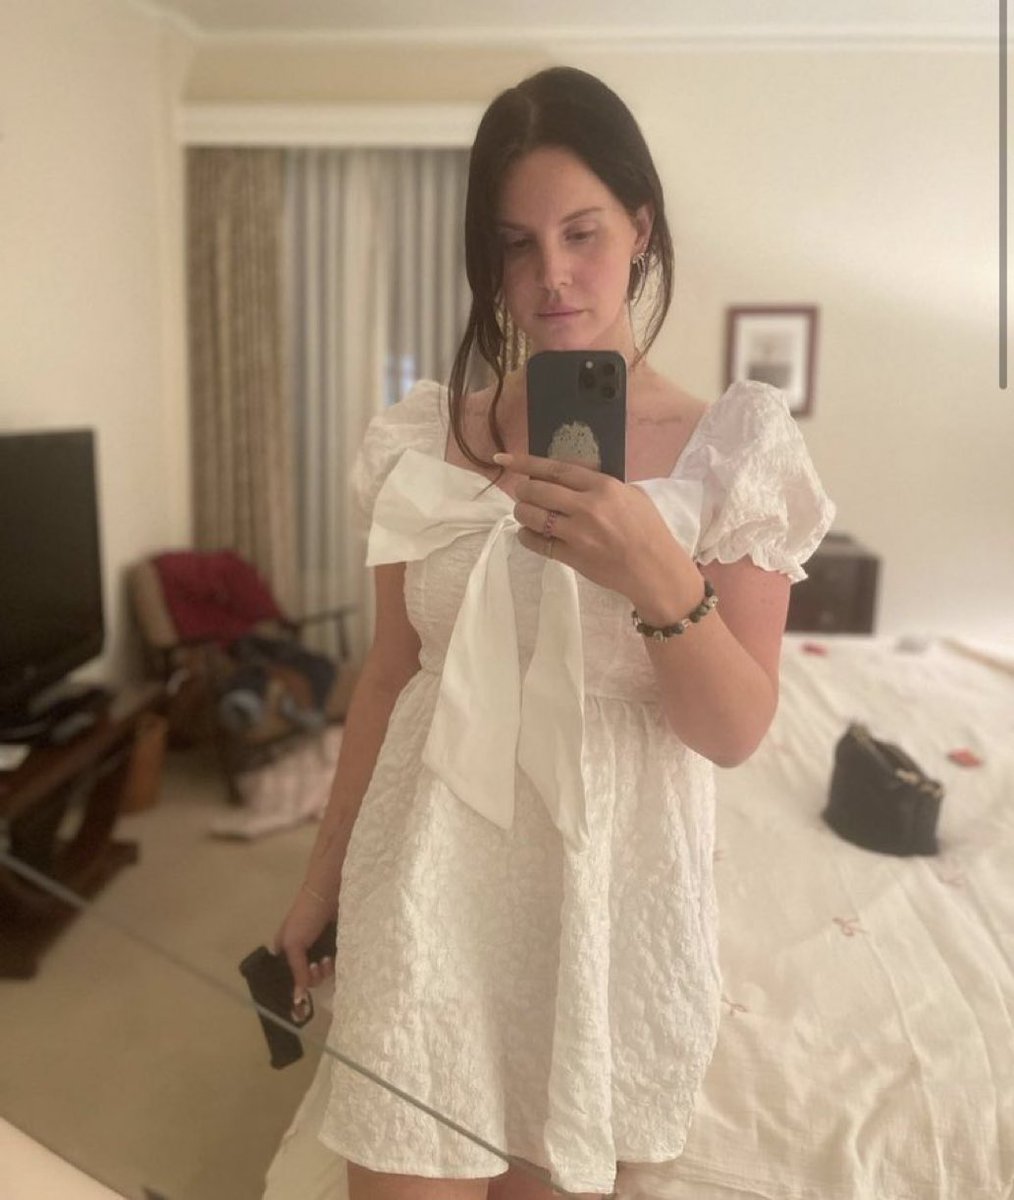 Lana Del Rey shares a new photo on Instagram